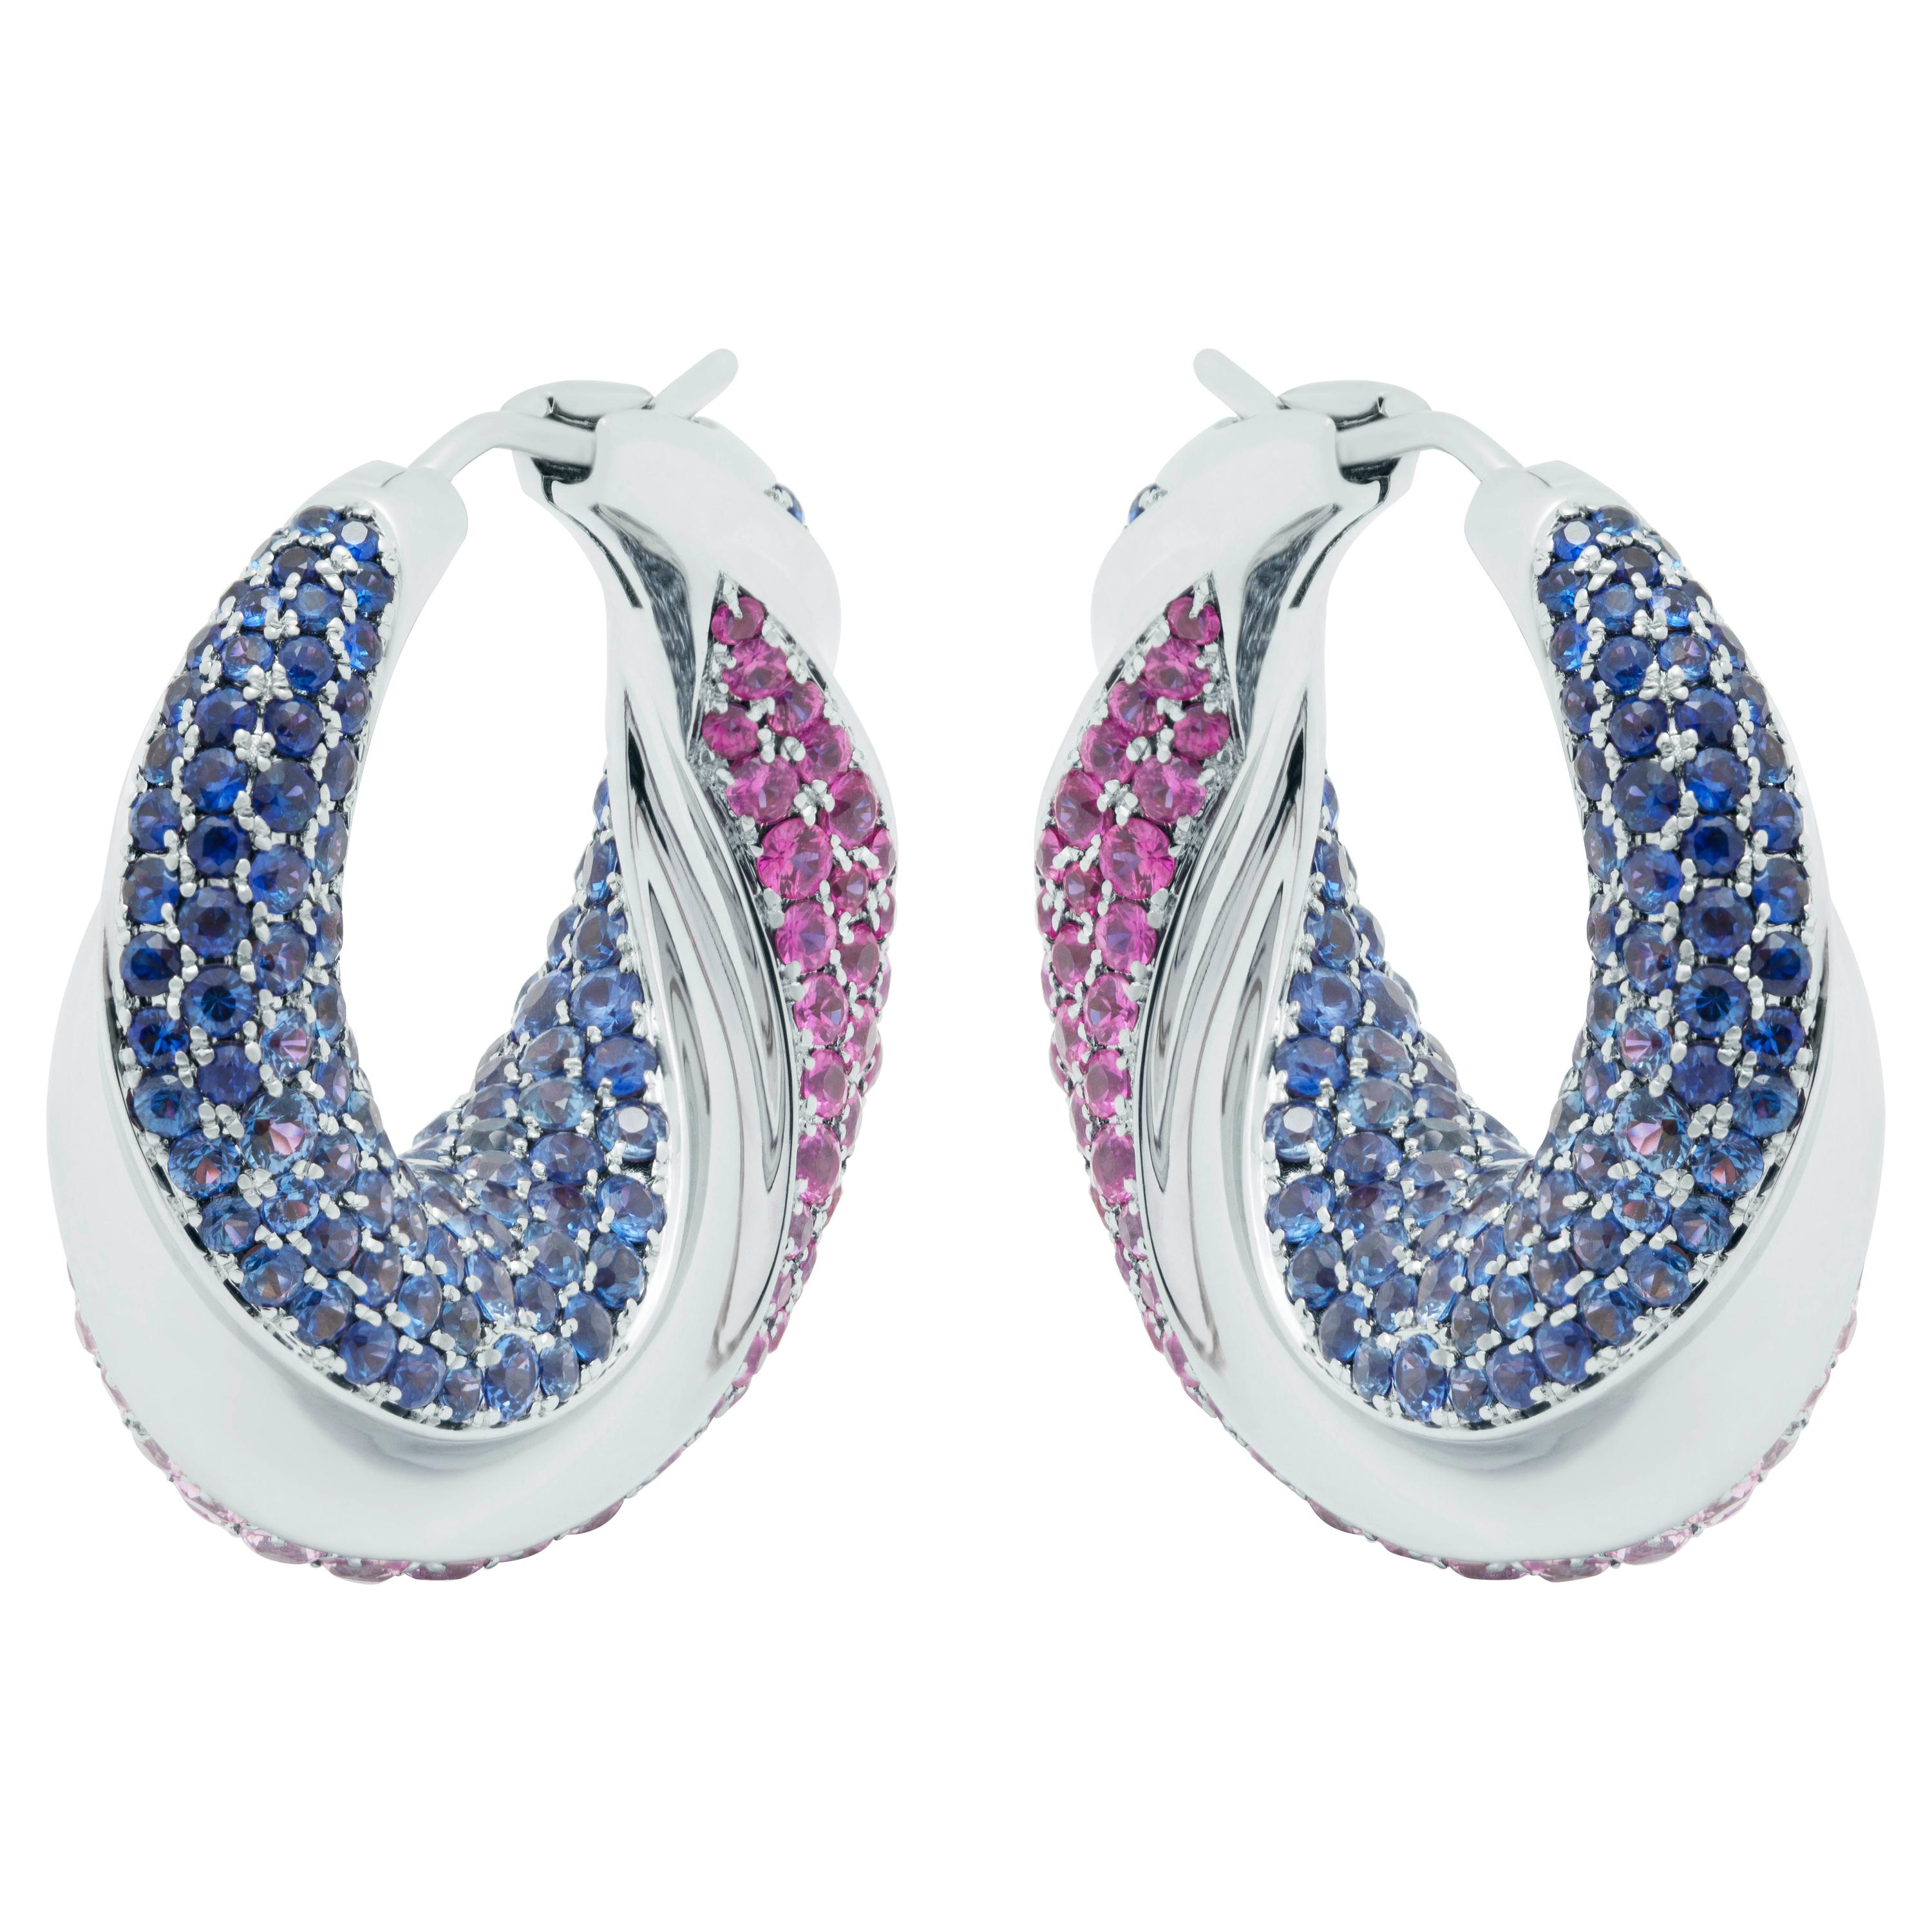 Pink and Blue Sapphires 18 Karat White Gold New Age Earrings
Look at this spectacular 196 Pink Sapphires weighing 3.96 Carat and 248 Blue Sapphires weighing 3.90 Carat combination. This gleaming ensemble creates a feeling of love and passion. White